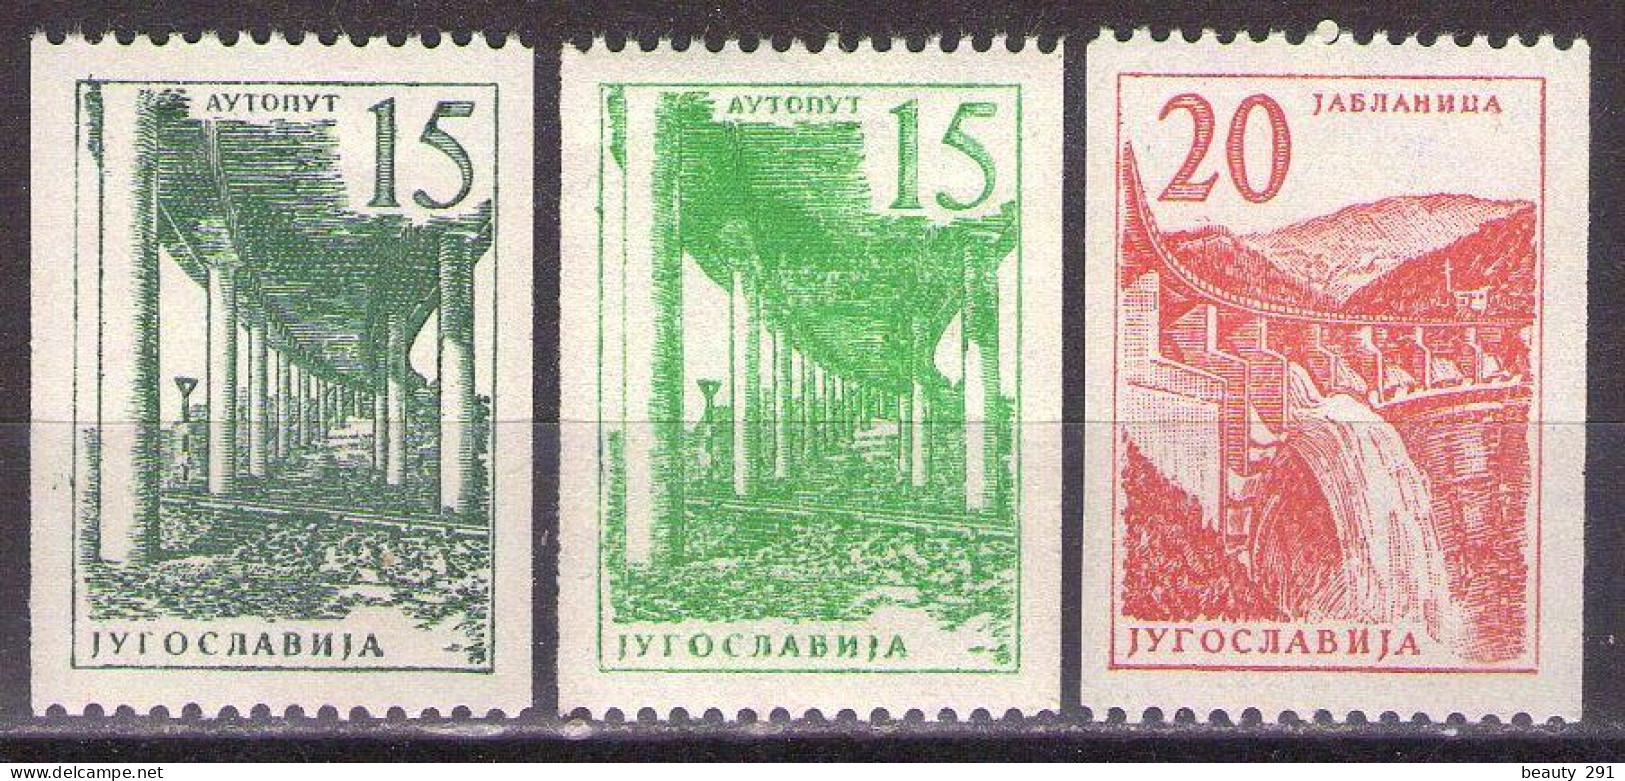 Yugoslavia 1959 - Industry And Architecture Coil Stamps - Mi 898-899a,b - MNH**VF - Unused Stamps